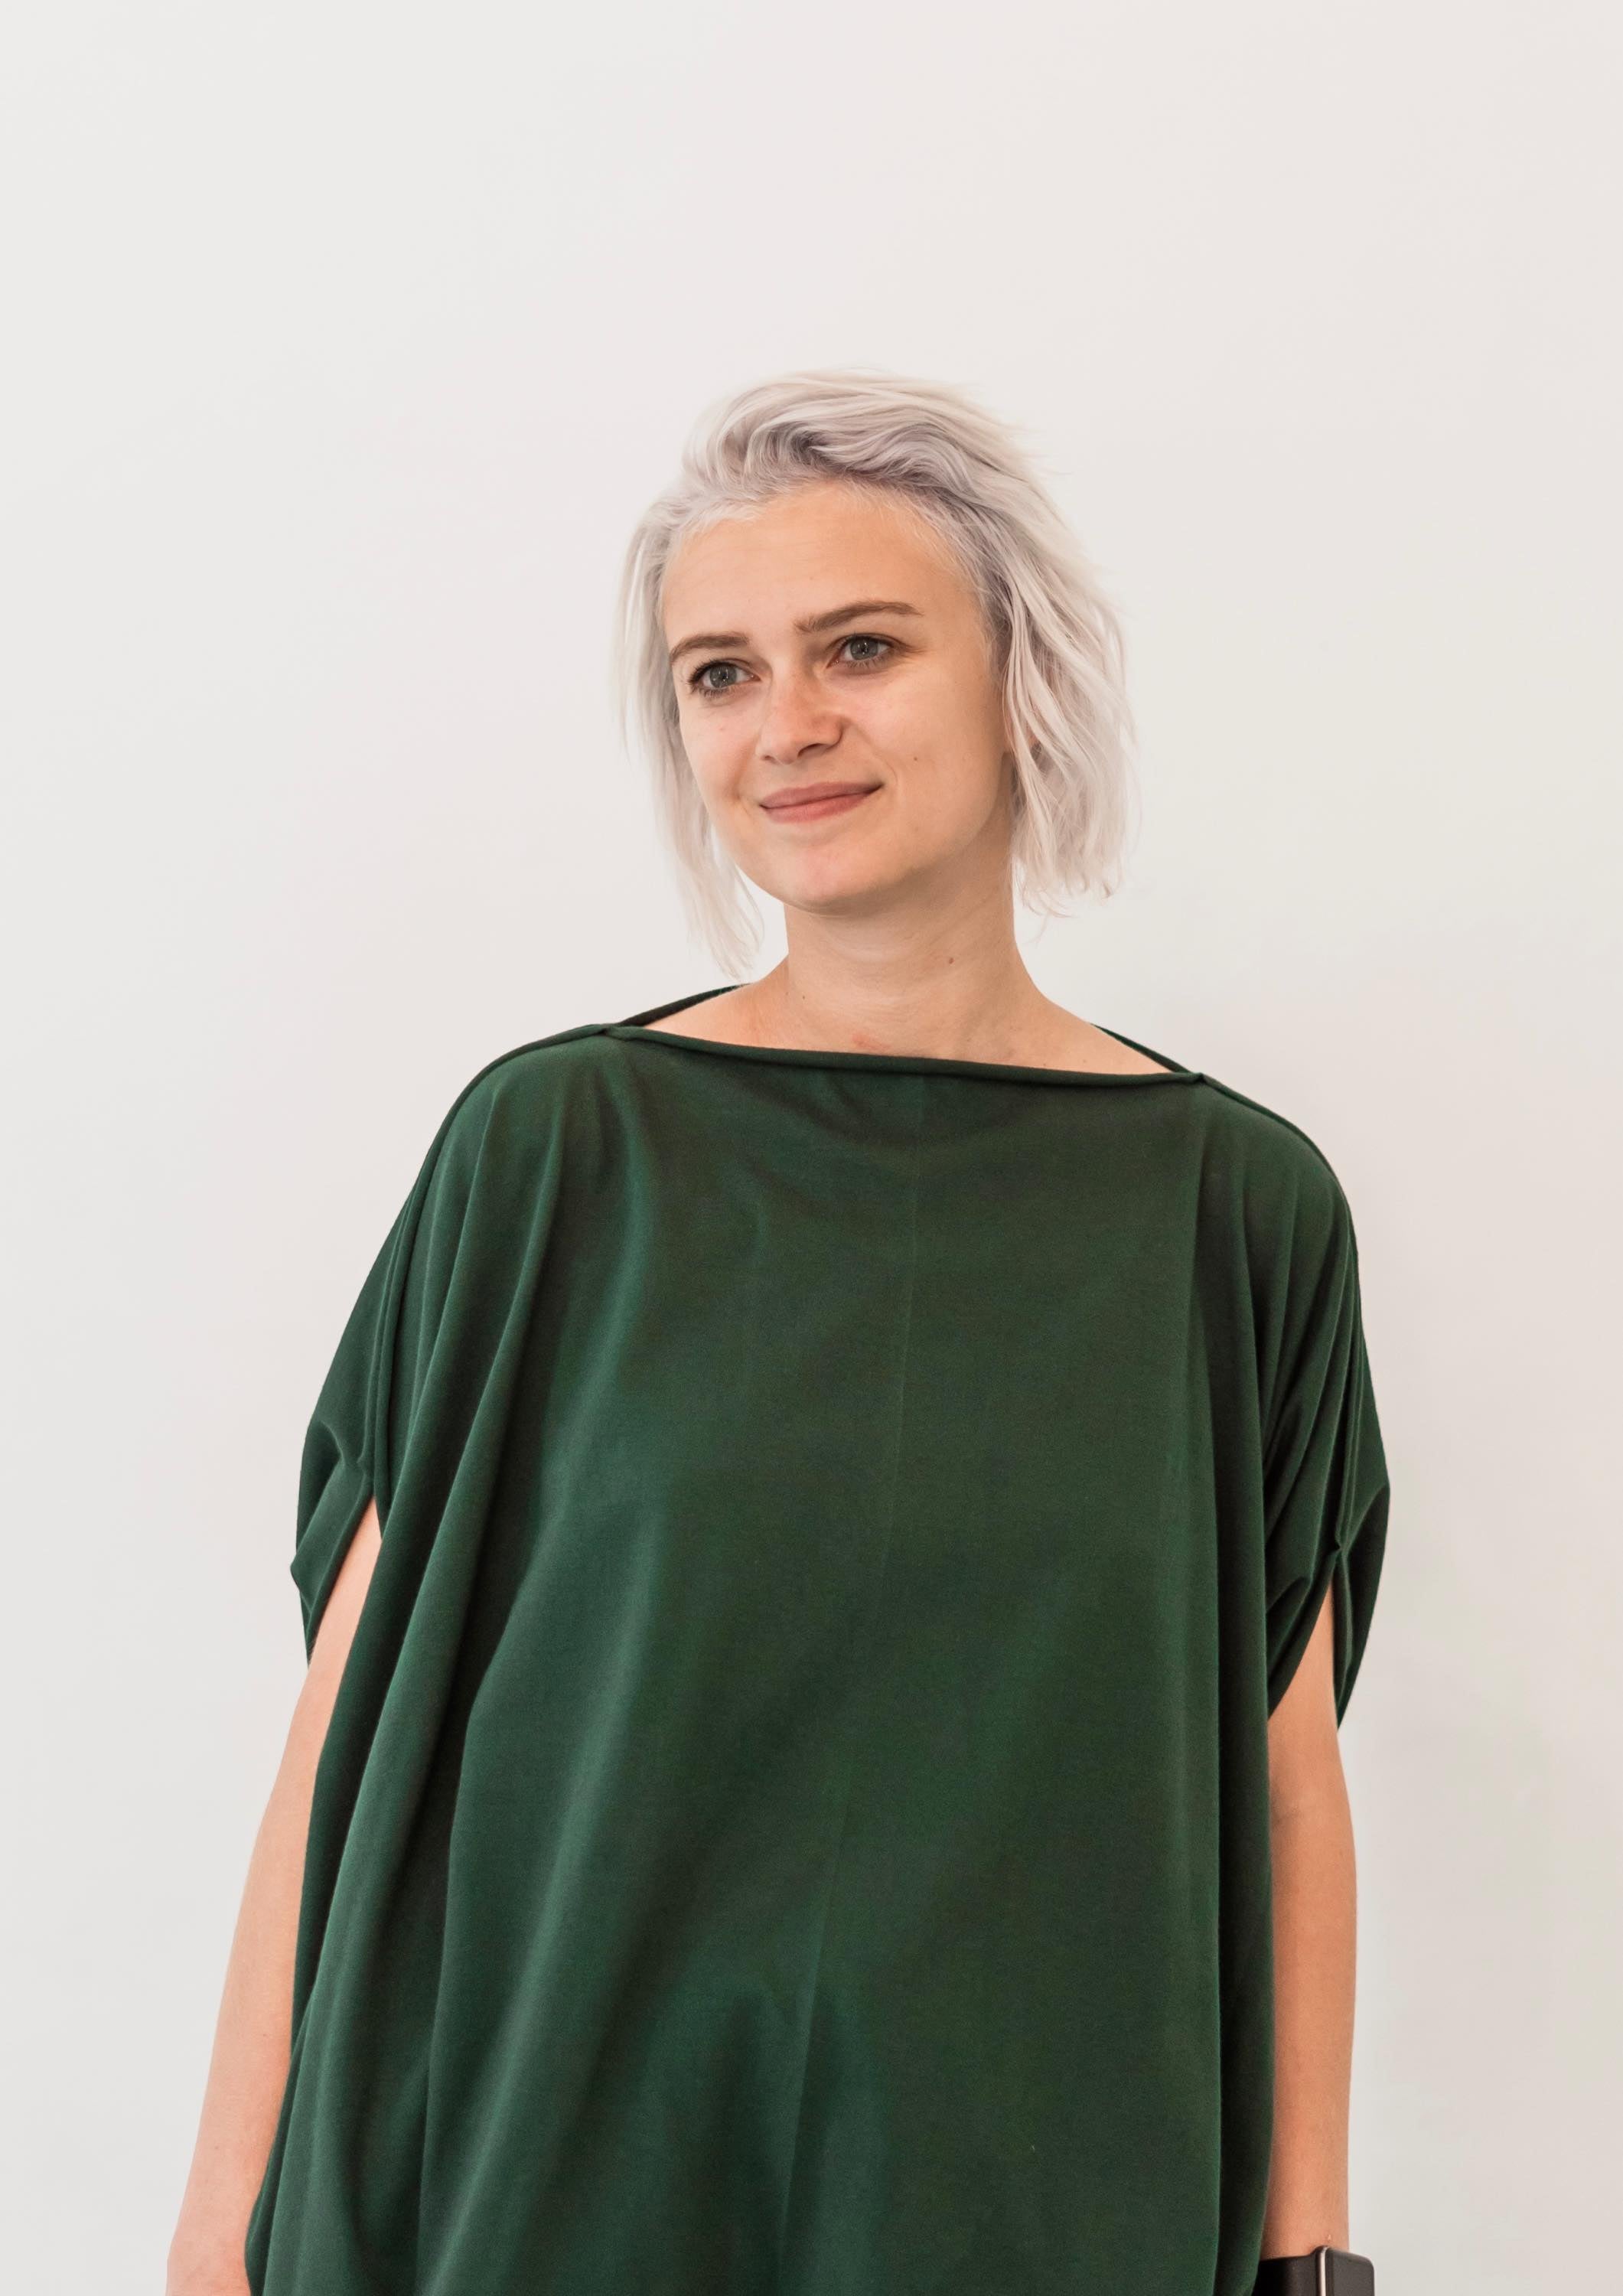 Multifunctional deep green fluid jersey, made from 100% organic cotton. Can be worn as a blouse, vest or poncho. With two sided adjustable drawn strings.